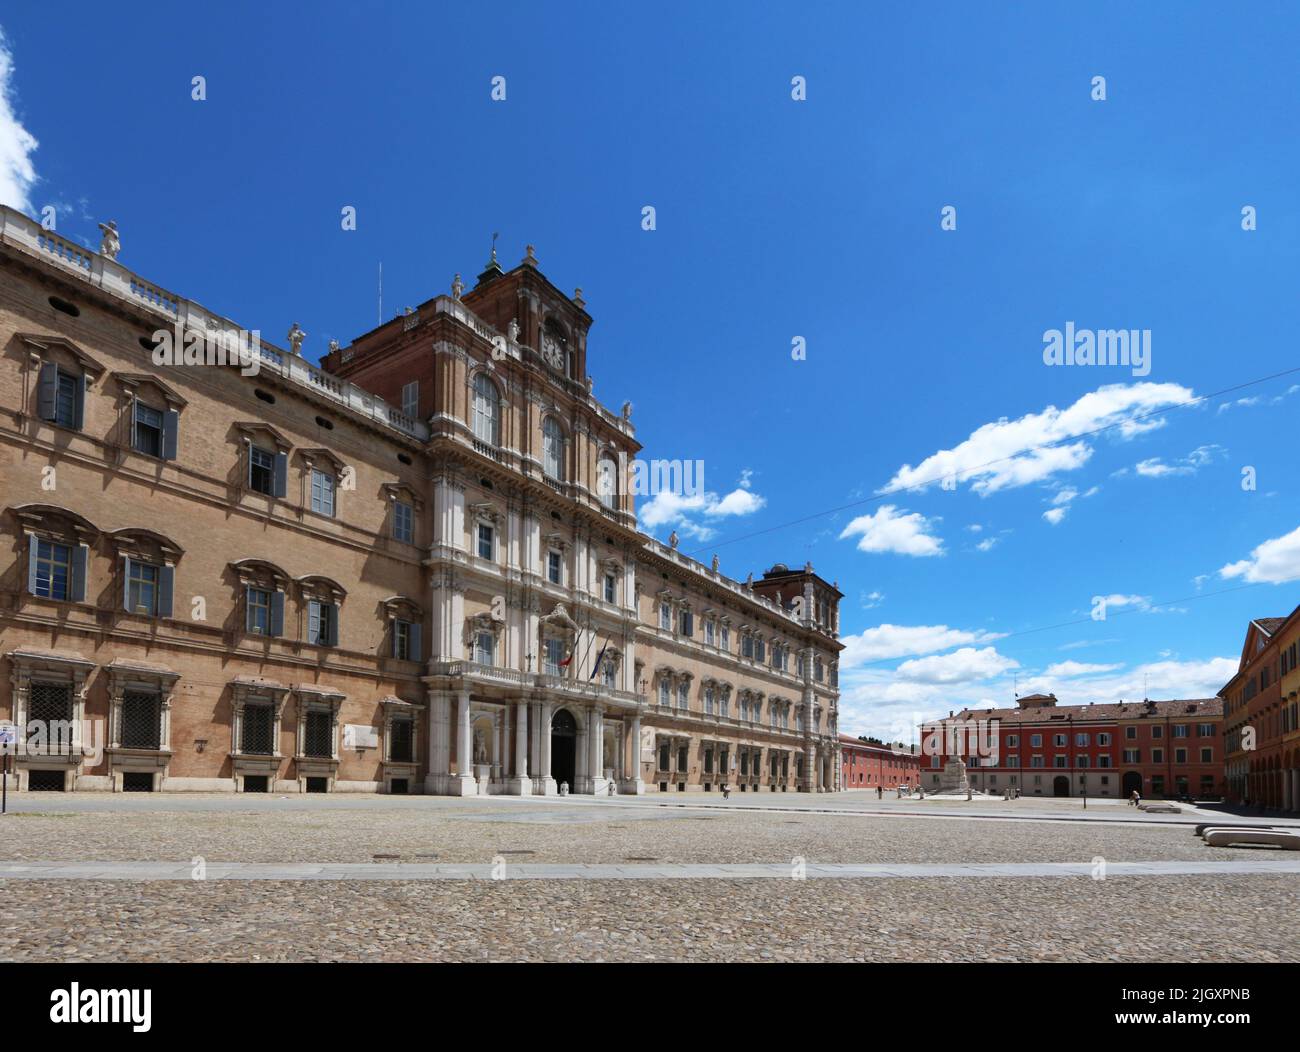 Modena, Emilia-Romagna, Italy, panorama of Piazza Roma with in the background the facade of the former ducal palace, now the Military Academy, tourist Stock Photo